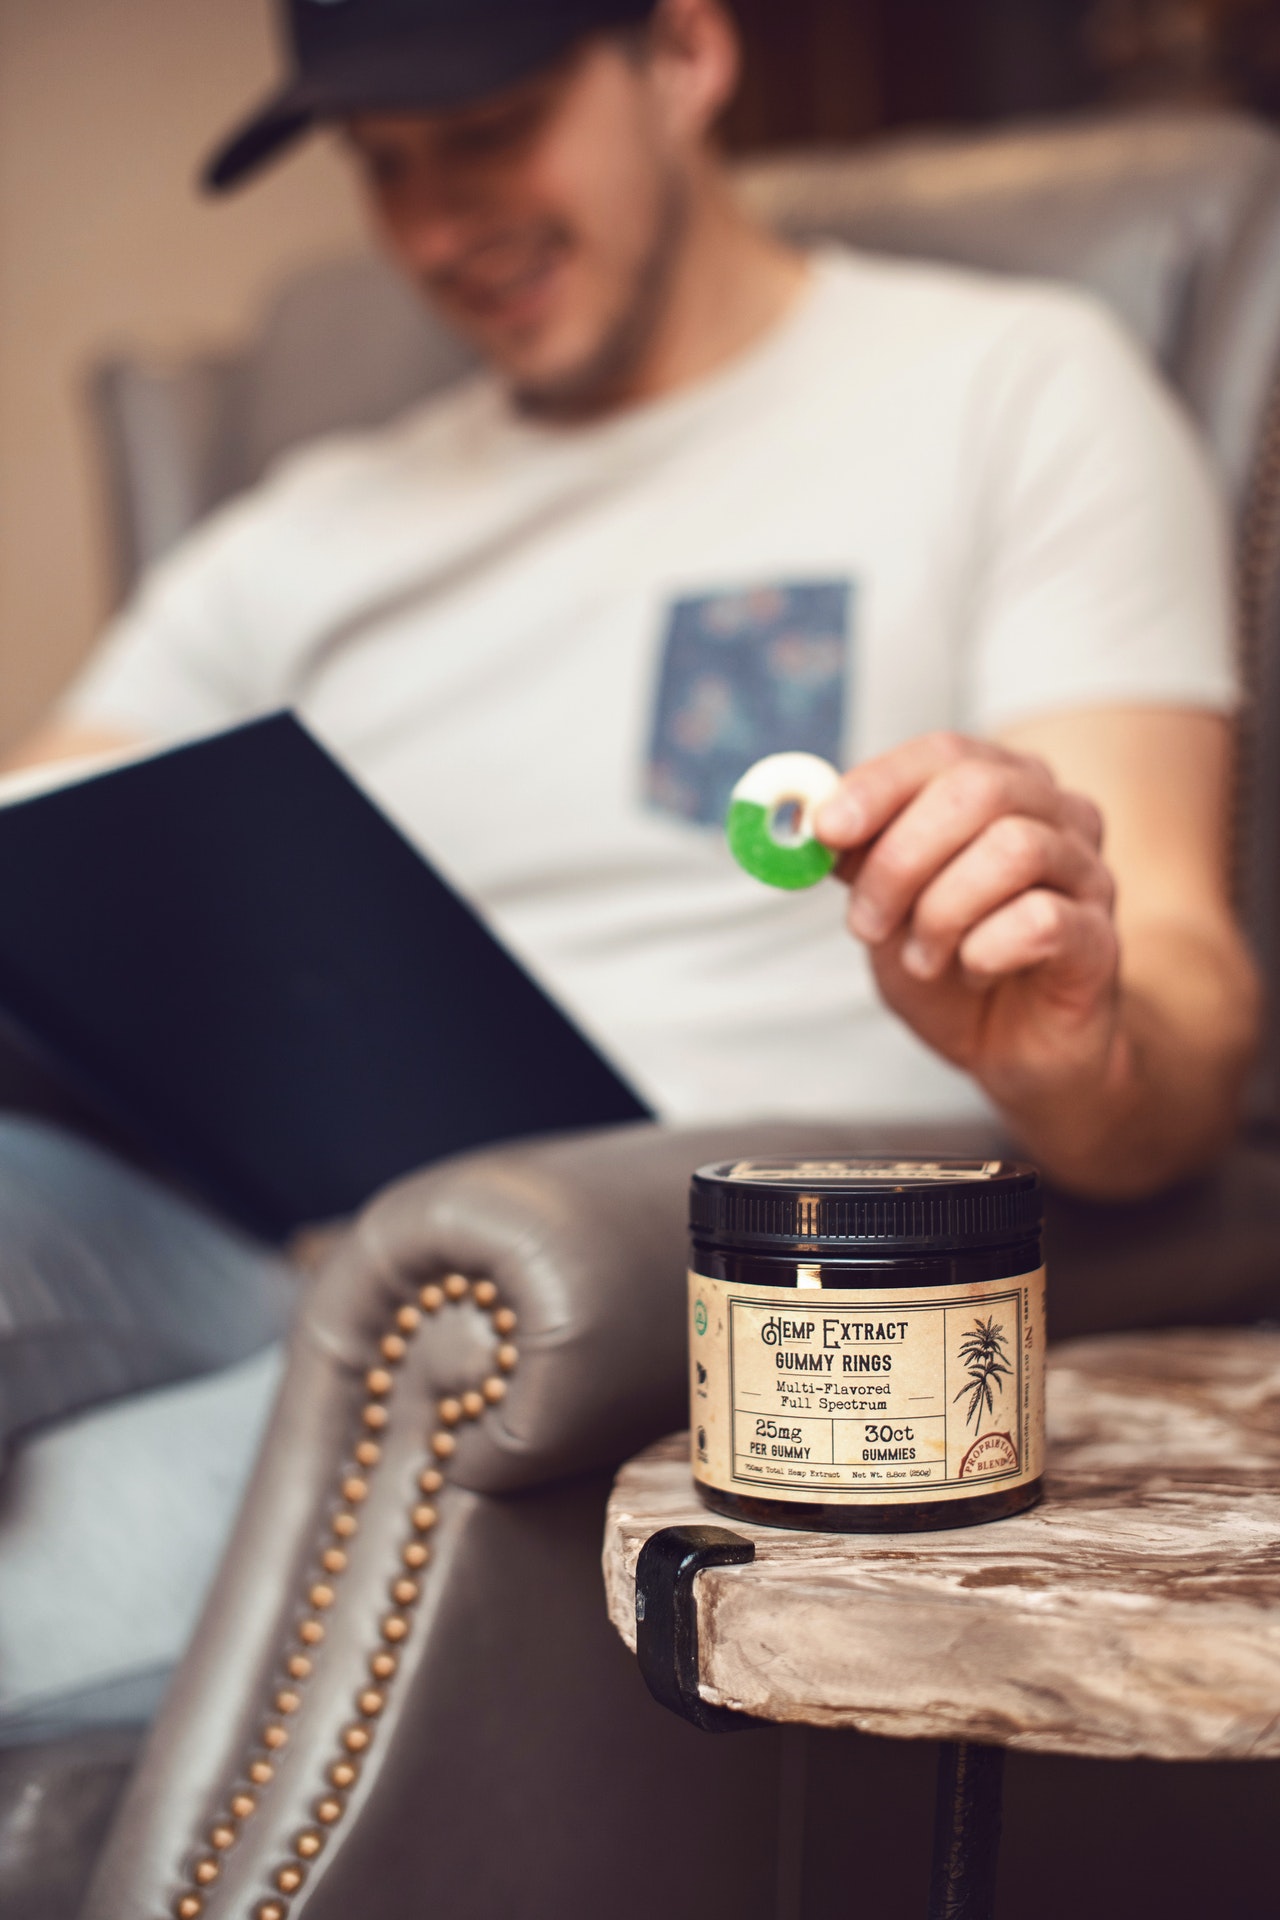 Everything you need to know about CBD products